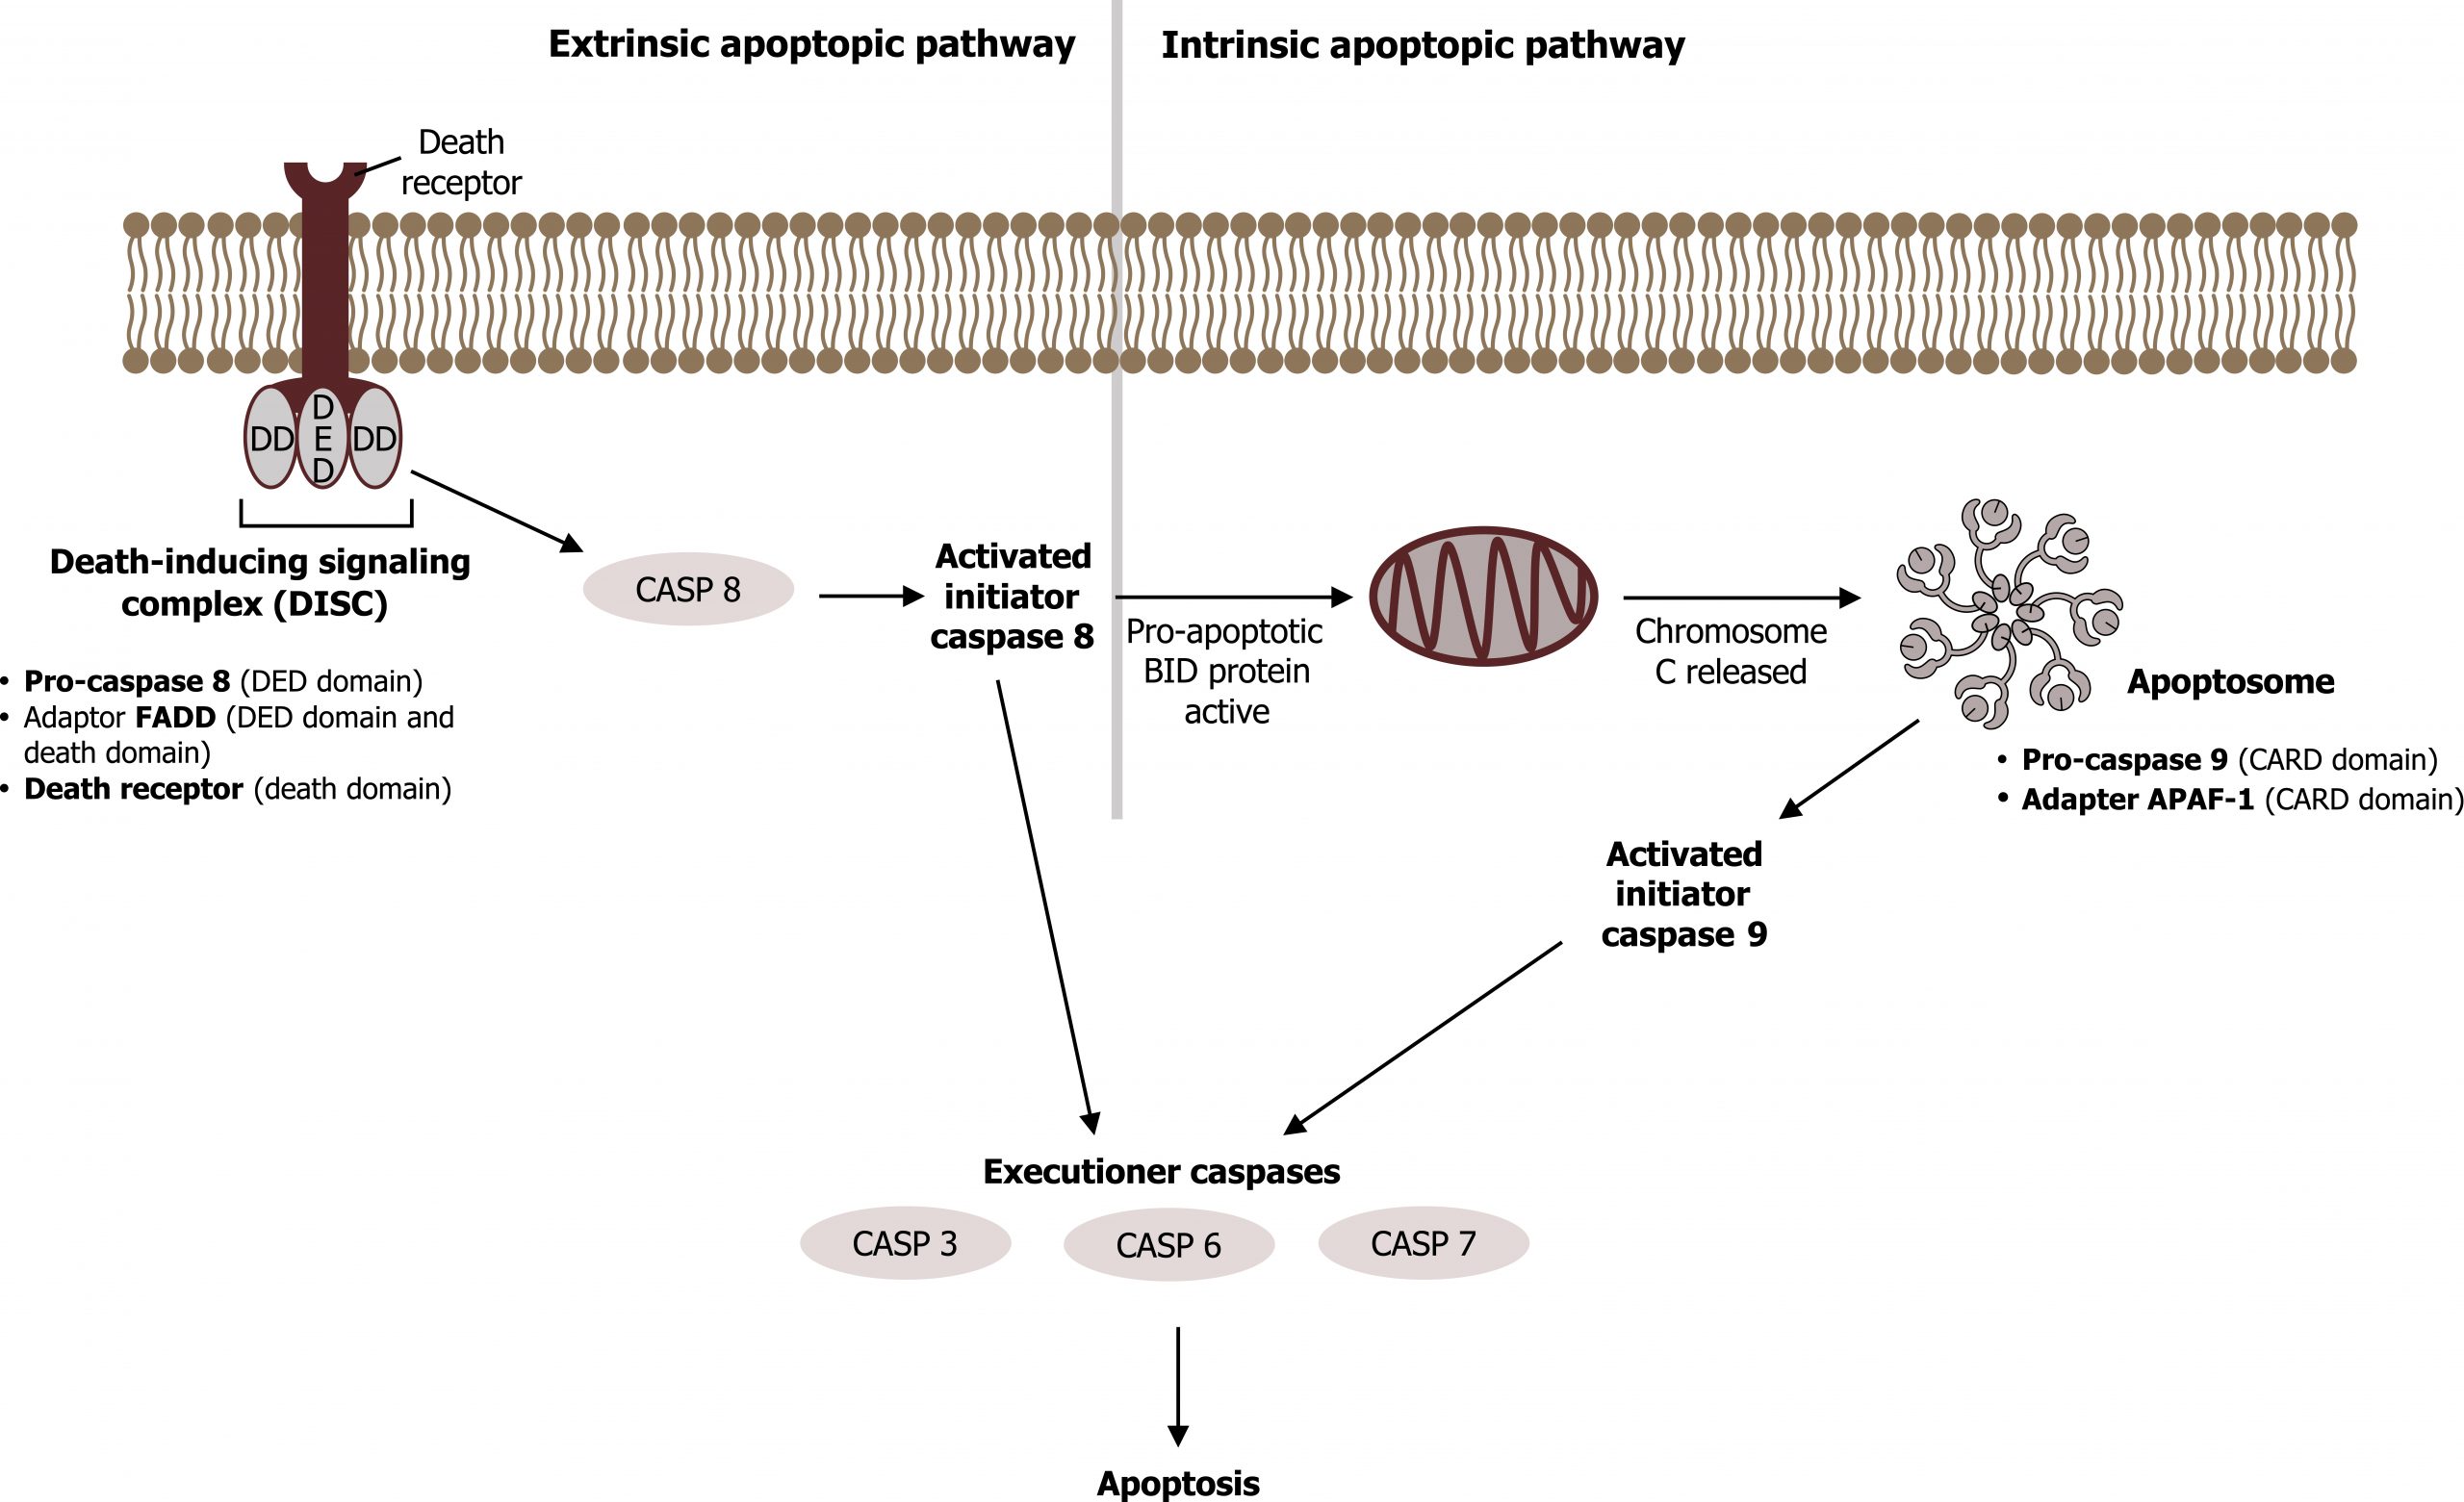 Extrinsic Apoptotic pathway: Death receptor with death inducing signaling complex (DISC) with DD, DED, and DD domains. Pro-caspase 8 (DED), adaptor FADD (DED and DD), death receptor (DD). Arrow Casp 8 to activated initiator caspase 8. Intrinsic apoptotic pathway: Activated initiator caspase 8 arrow text pro-apoptotic active to oval with zigzag line arrow text chromosome C released to apoptosome with Pro-caspase 9 (CARD) and adapter APAF-1 (CARD) arrow activated initiator caspase 9. Activated initiator caspase 8 and 9 arrow to arrow to executioner caspases (3, 6, 7) arrow apoptosis.